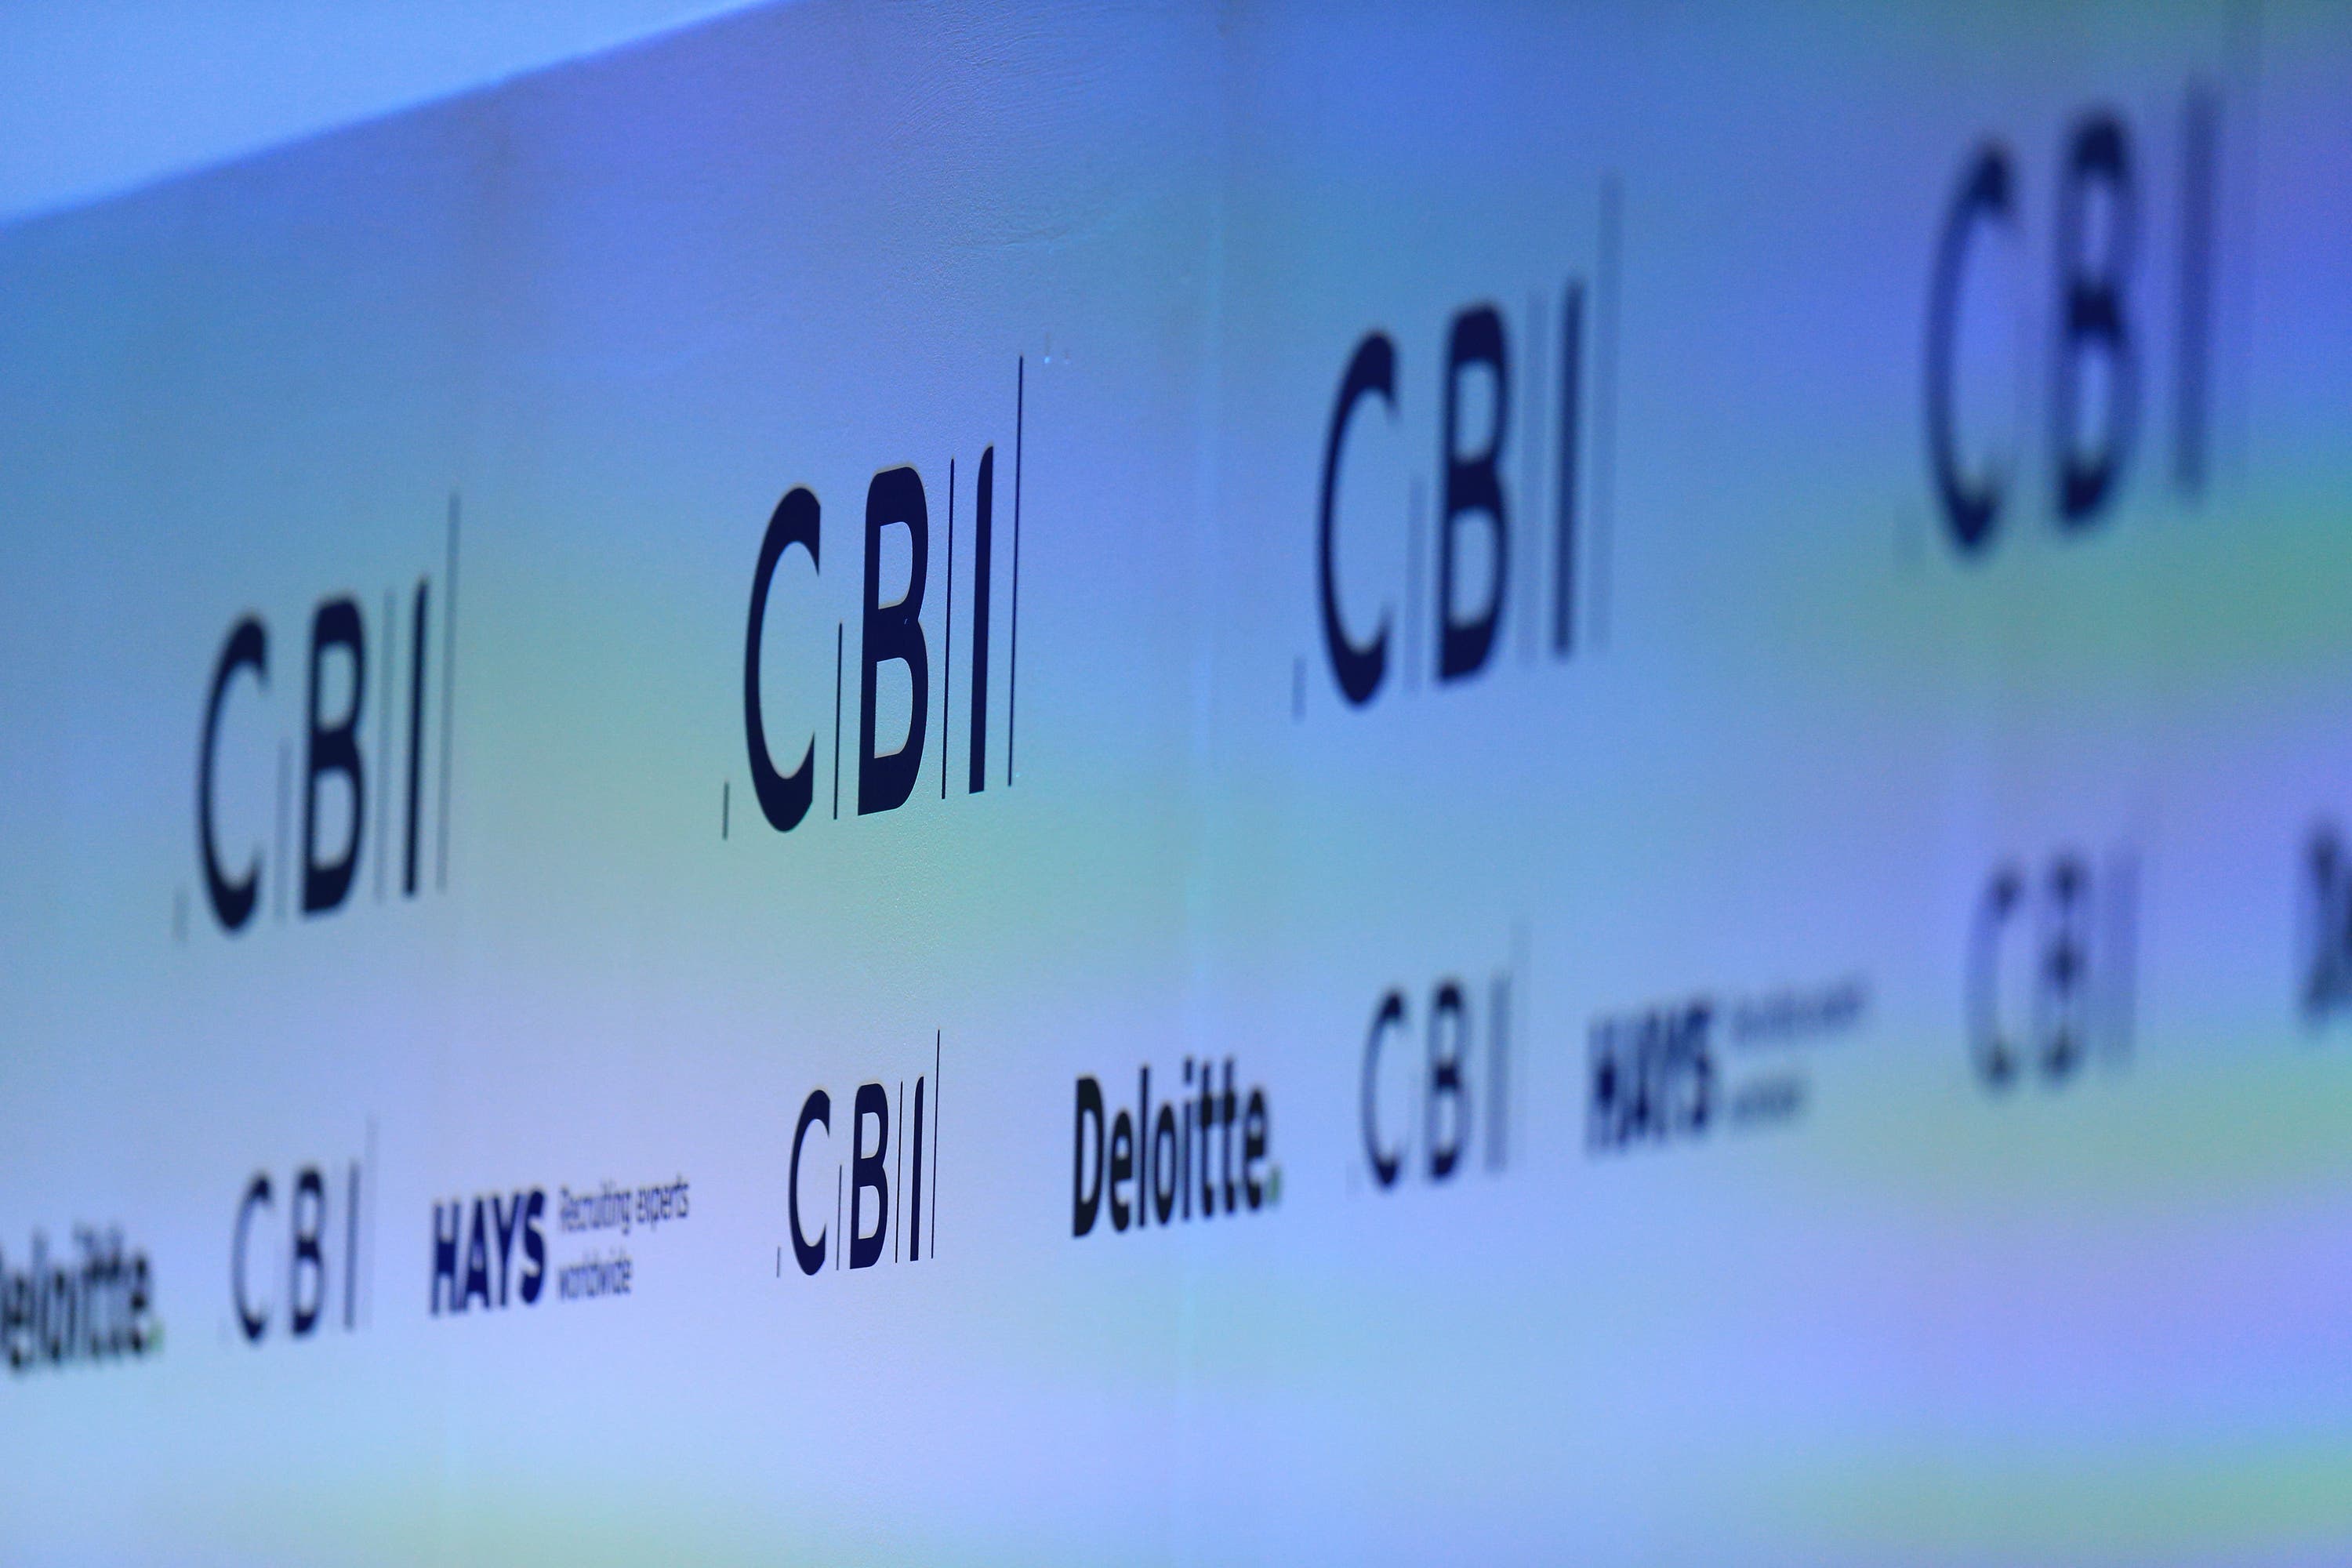 A number of allegations related to Mr Allan’s tenure at the CBI, where he was previously president and vice president.